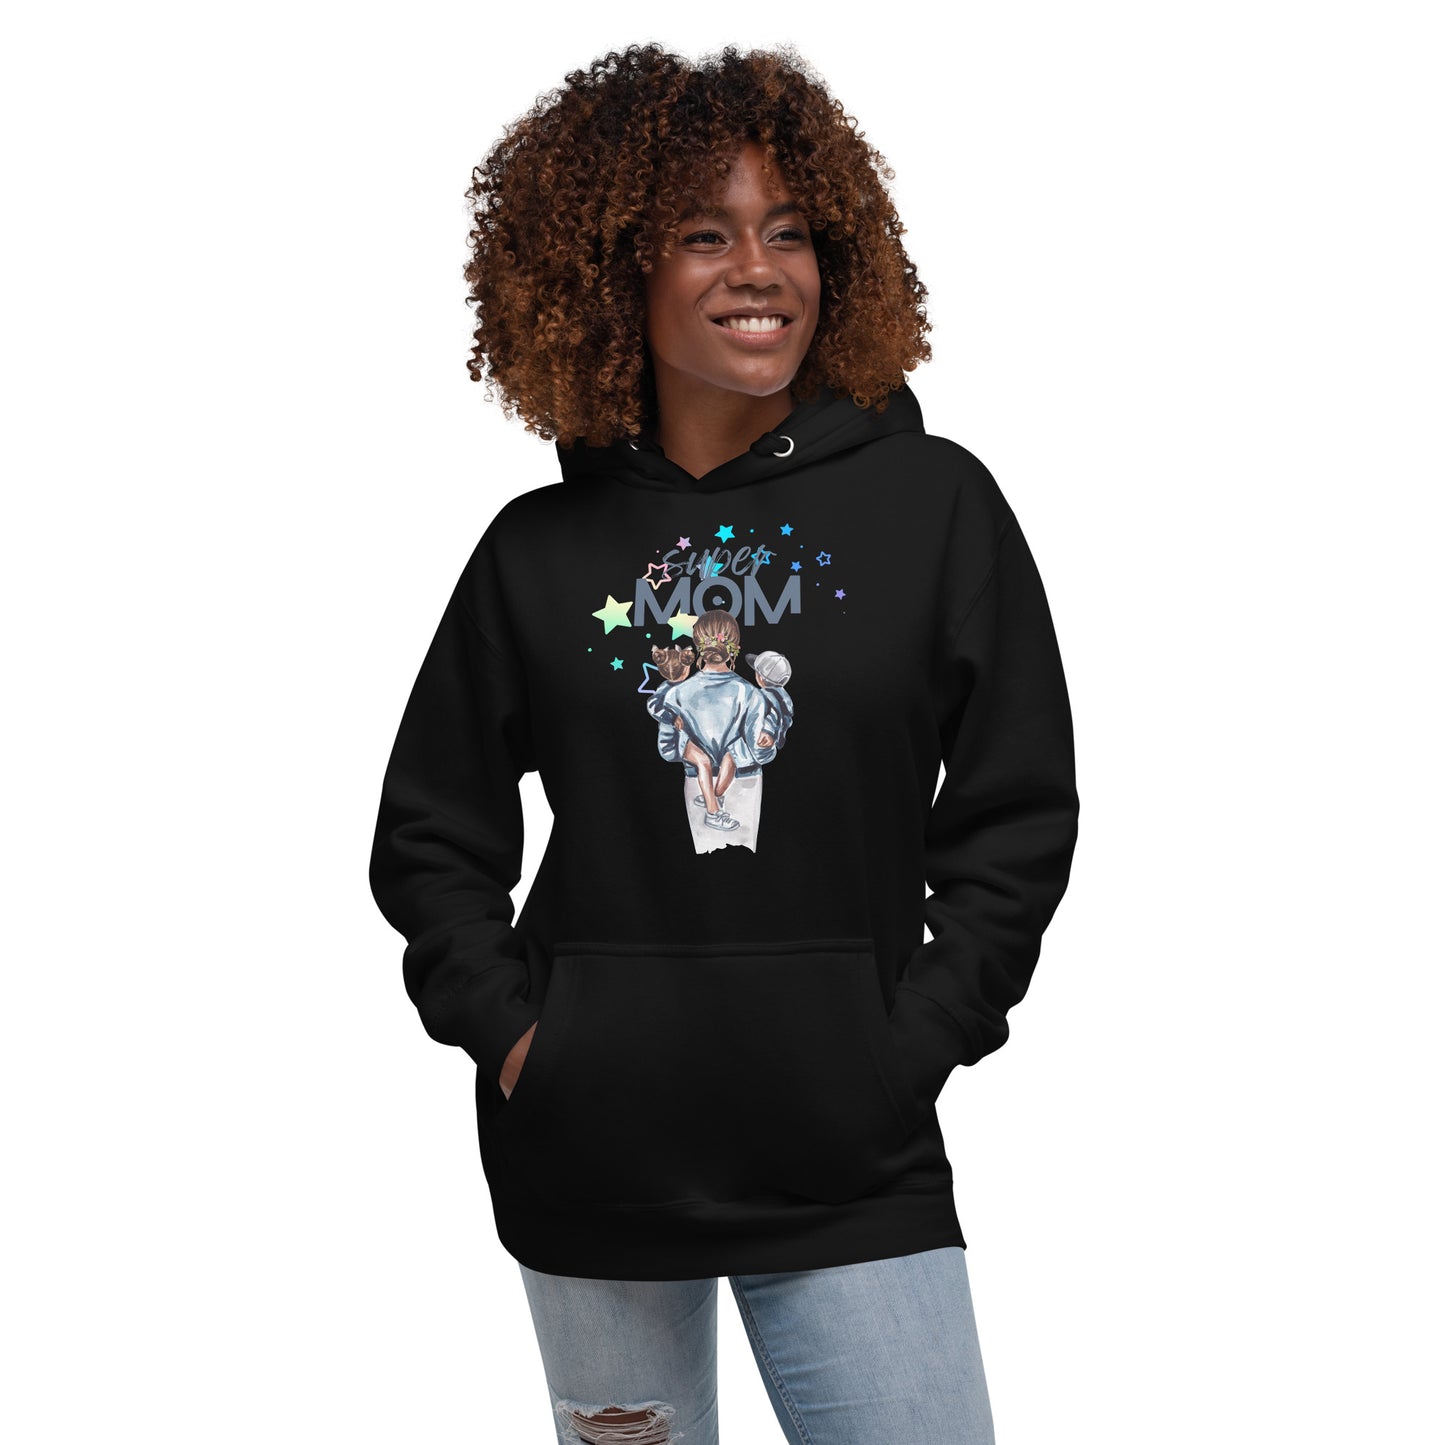 Super Mom With Kids Unisex Hoodie, Gifts for Moms, Mother's Day Gifts, Gifts for Mothers